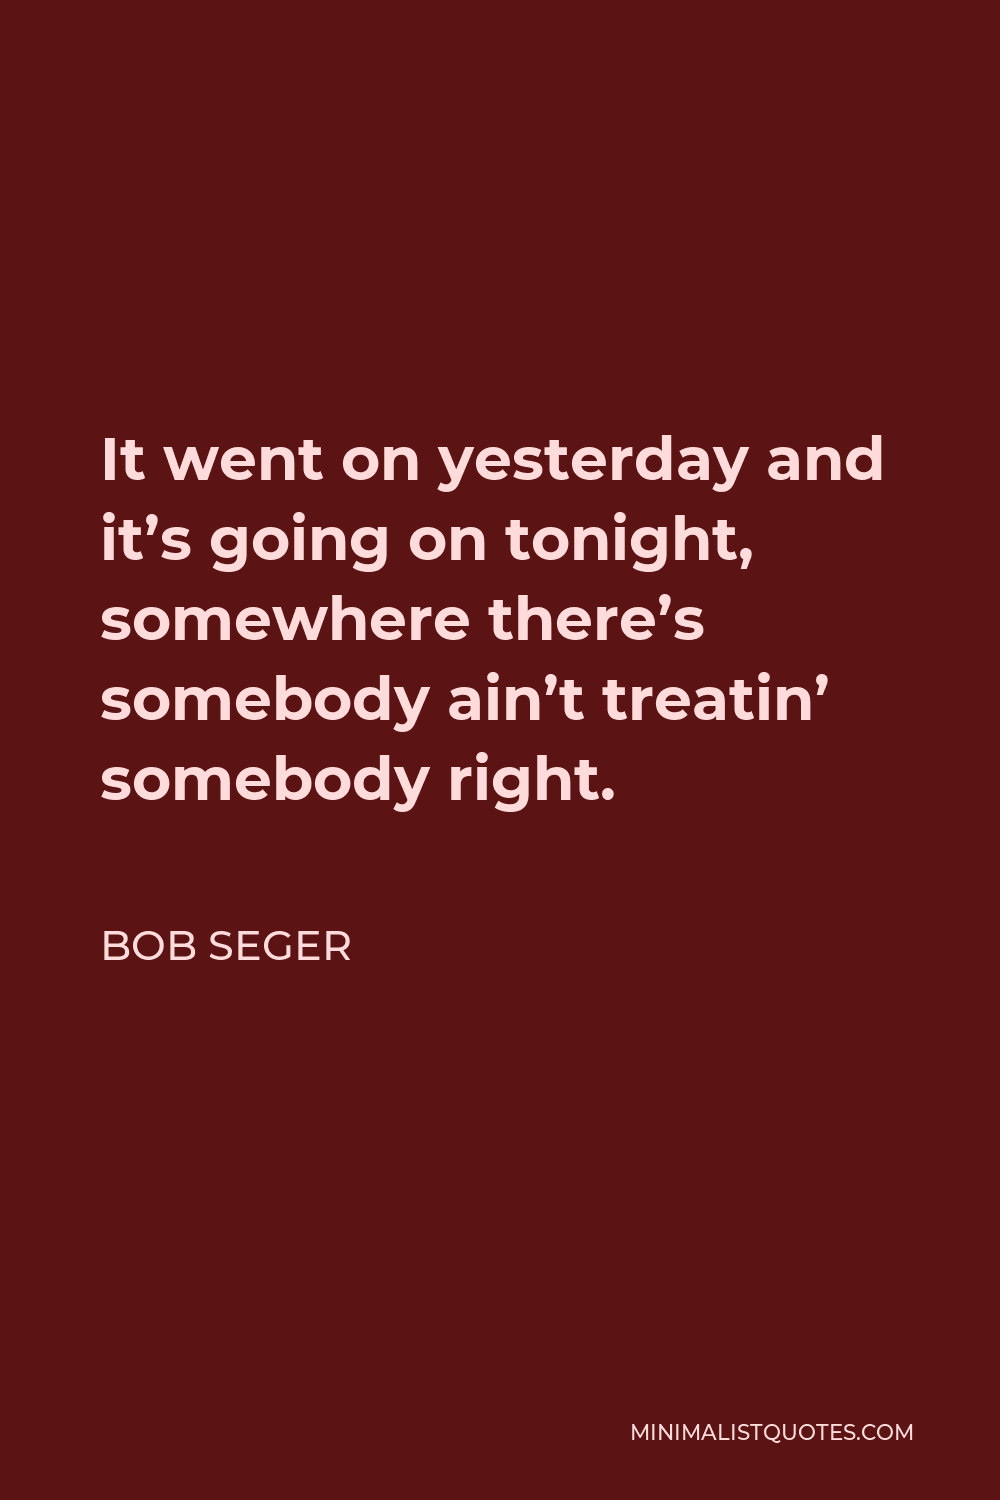 Bob Seger Quote - It went on yesterday and it’s going on tonight, somewhere there’s somebody ain’t treatin’ somebody right.